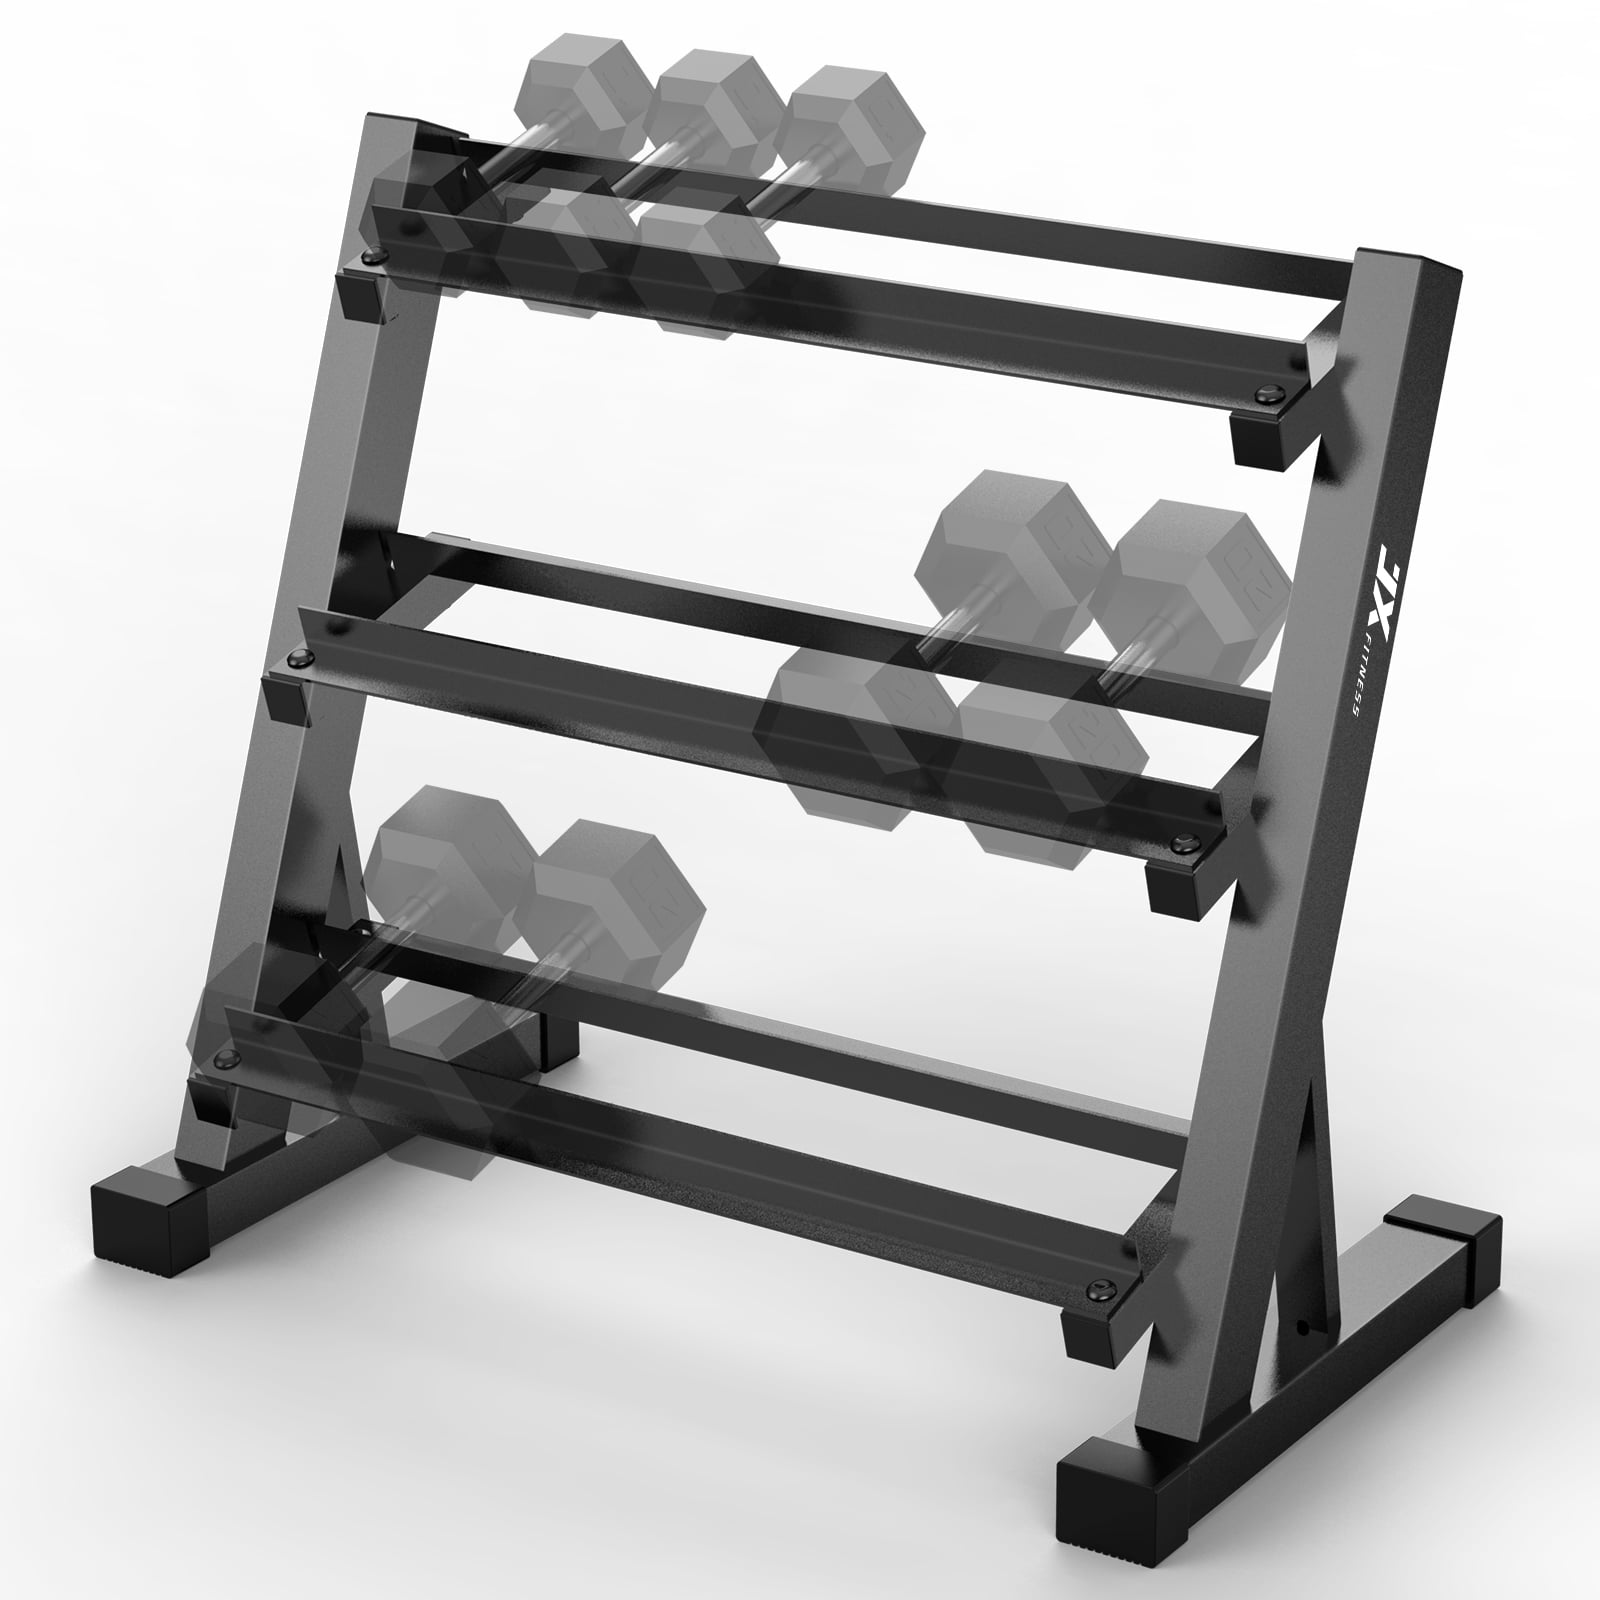 for Home Gym Use Without Dumbbells Metal Dumbbell Storage Stand Organizer 3 Tier Dumbbell Rack 